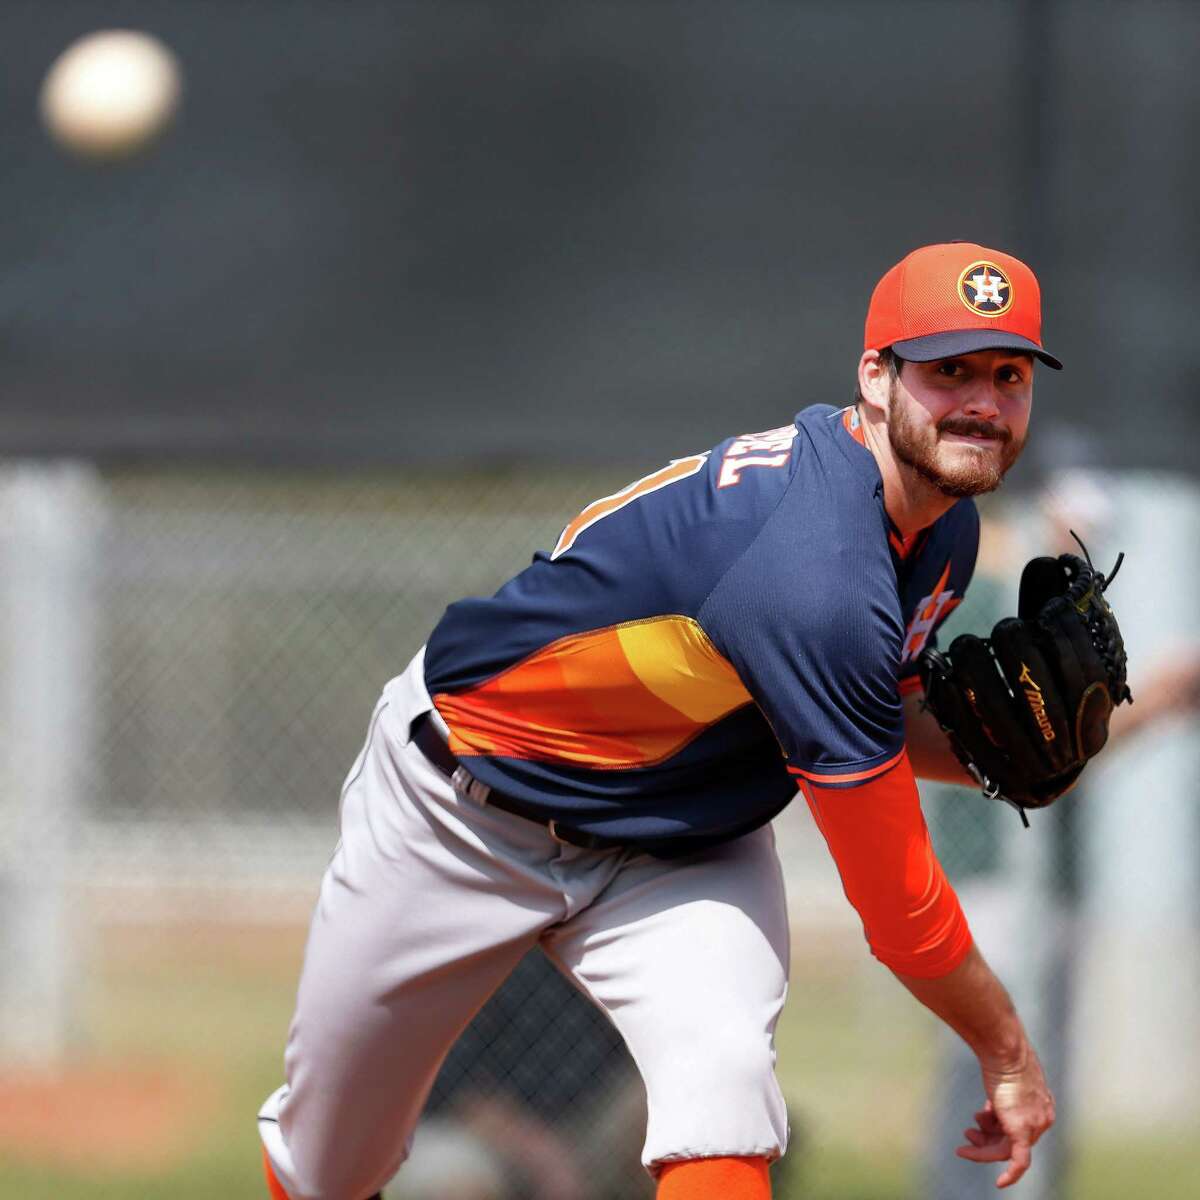 PHOTOS: Mark Appel's time in the Astros' system Houston Astros right handed pitcher Mark Appel (61) pitches during spring training workouts for pitchers and catchers at their Osceola County training facility, Monday, Feb. 23, 2015, in Kissimmee. ( Karen Warren / Houston Chronicle )